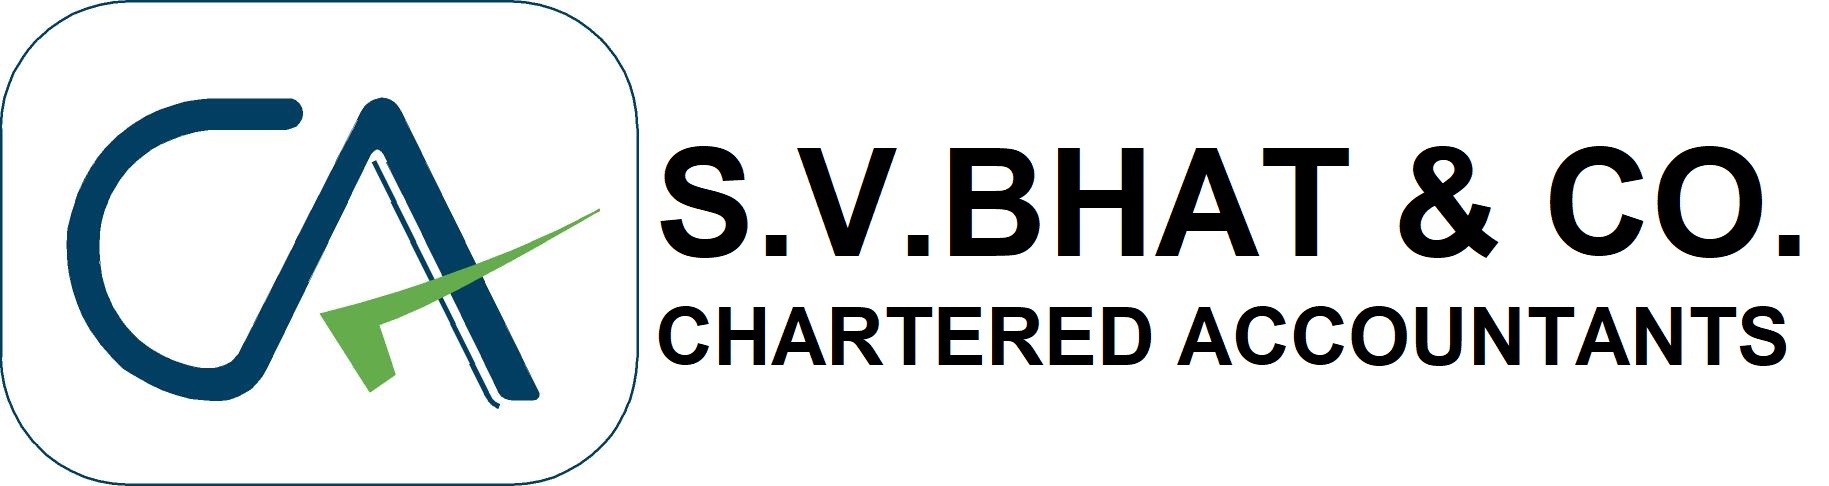 S.V. BHAT & CO